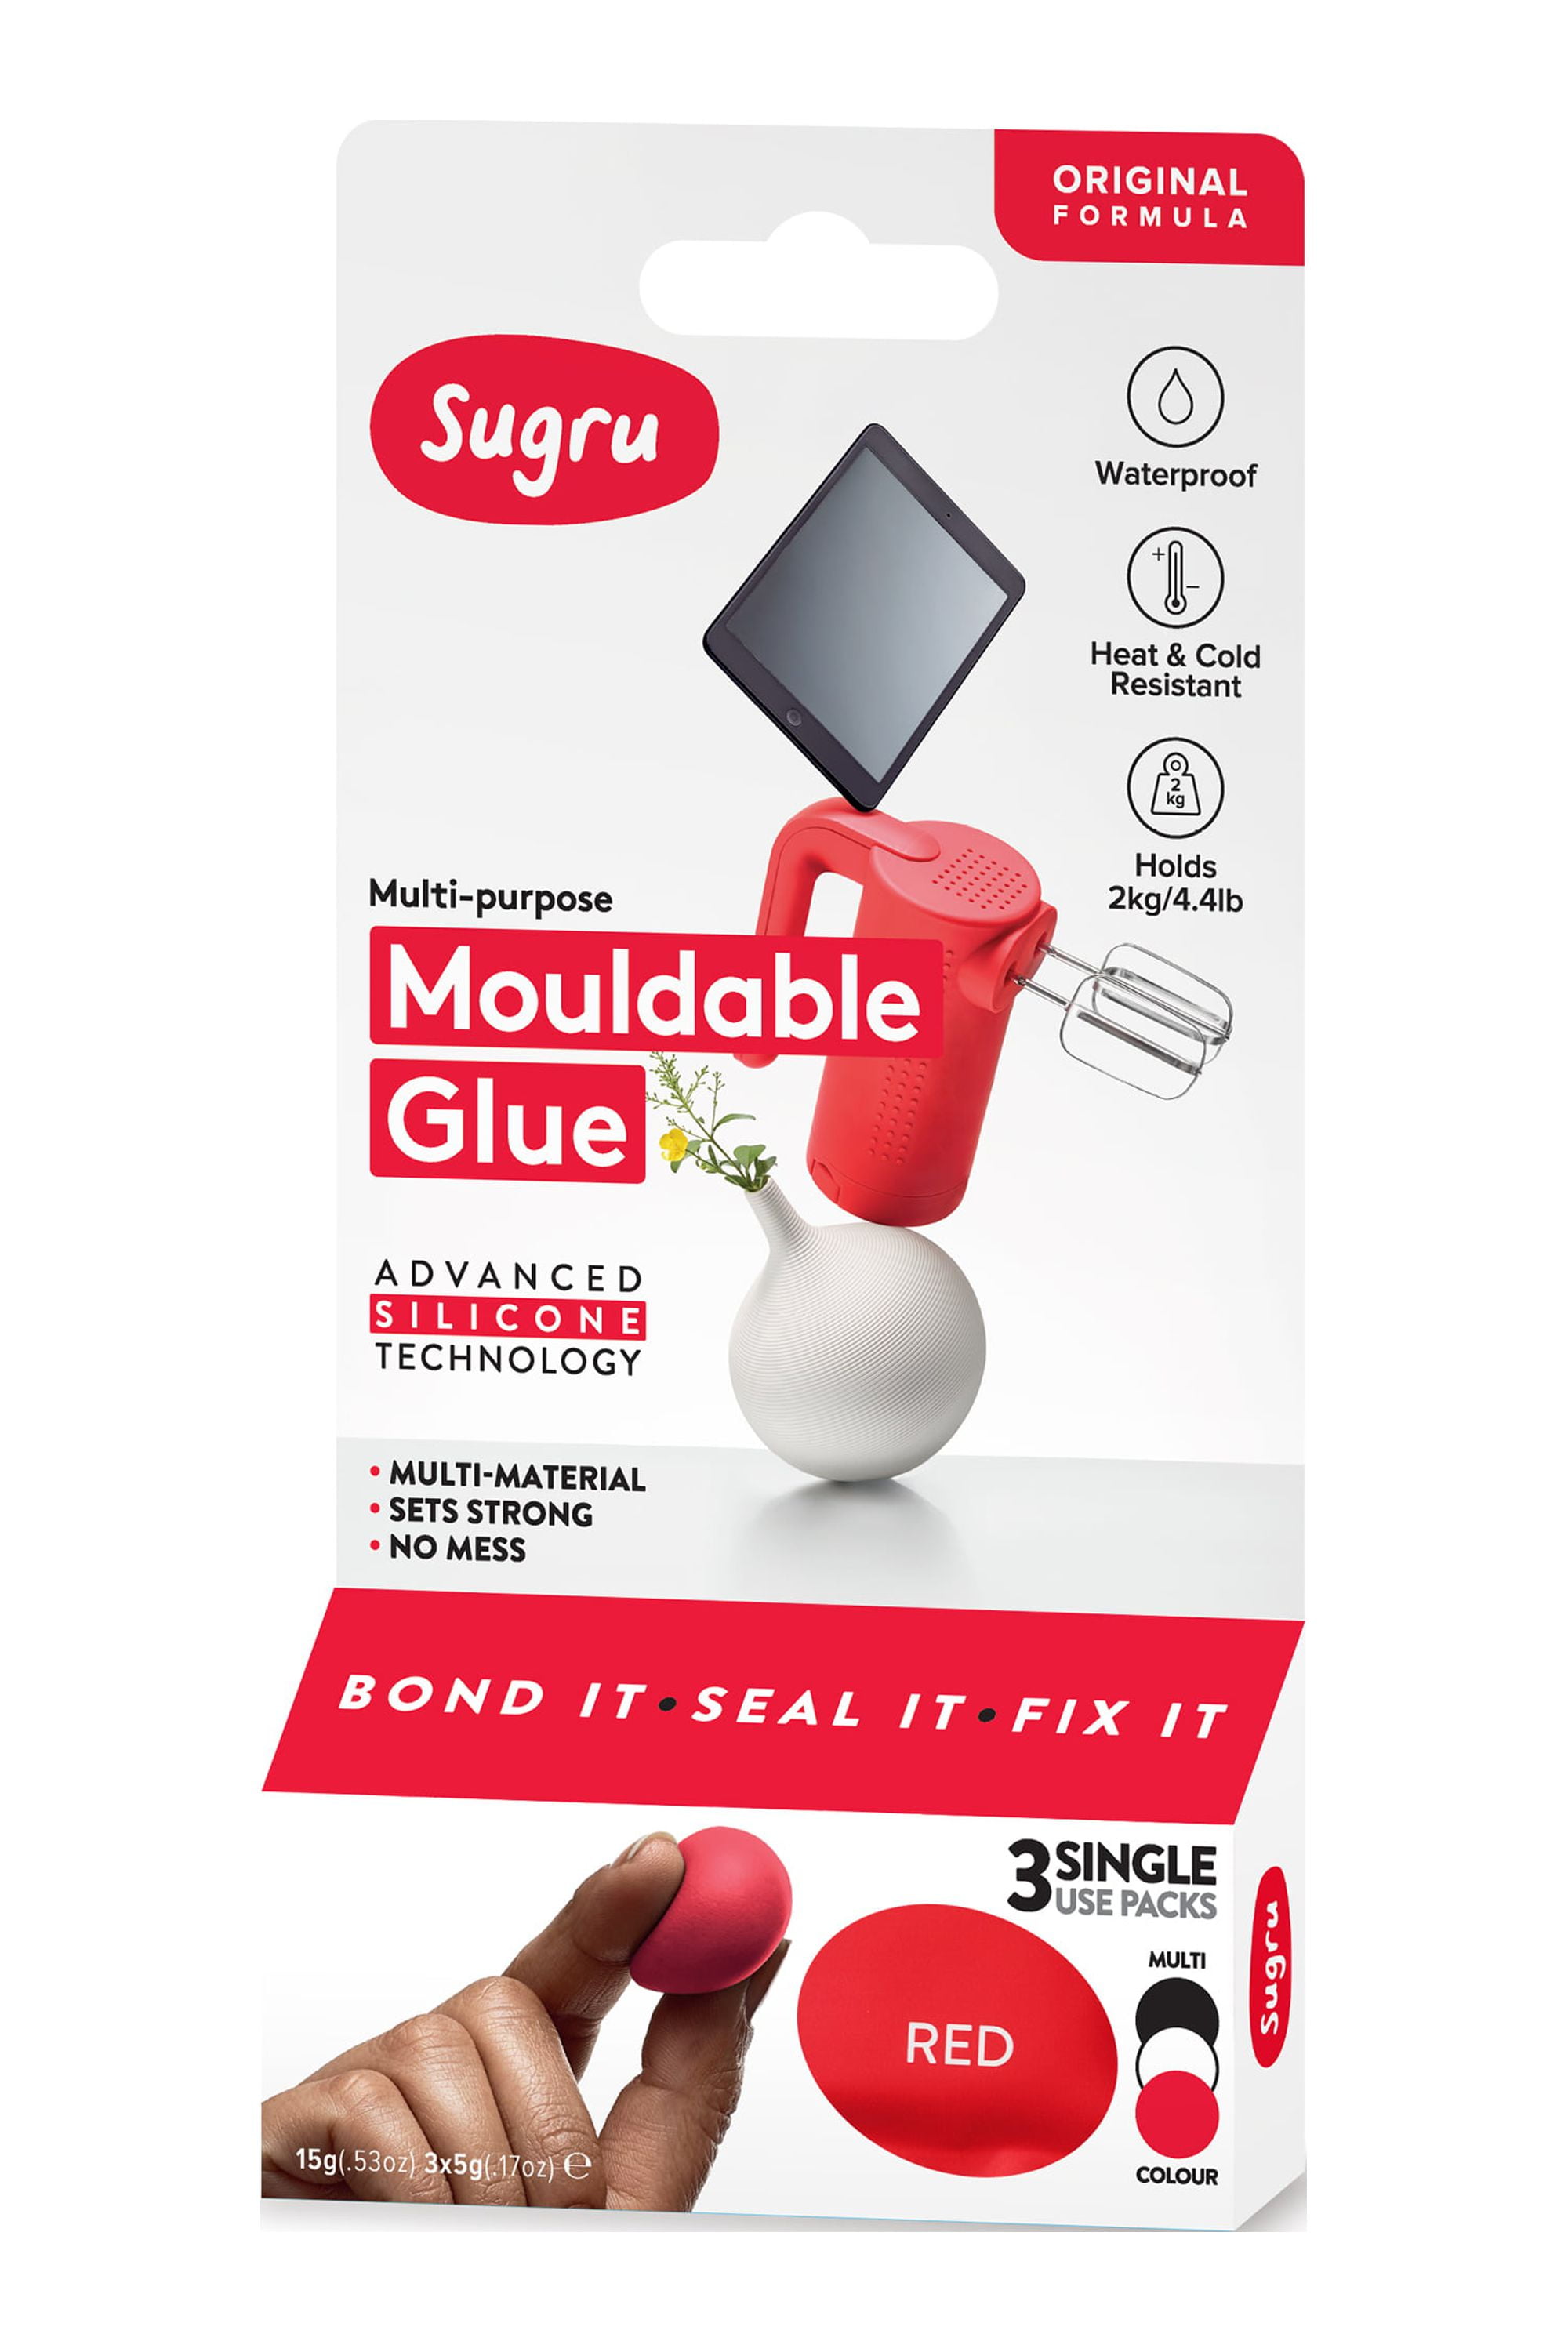 Sugru Original Mouldable Glue - Black, White, Red 3 Pack - PAST DATE SPECIAL